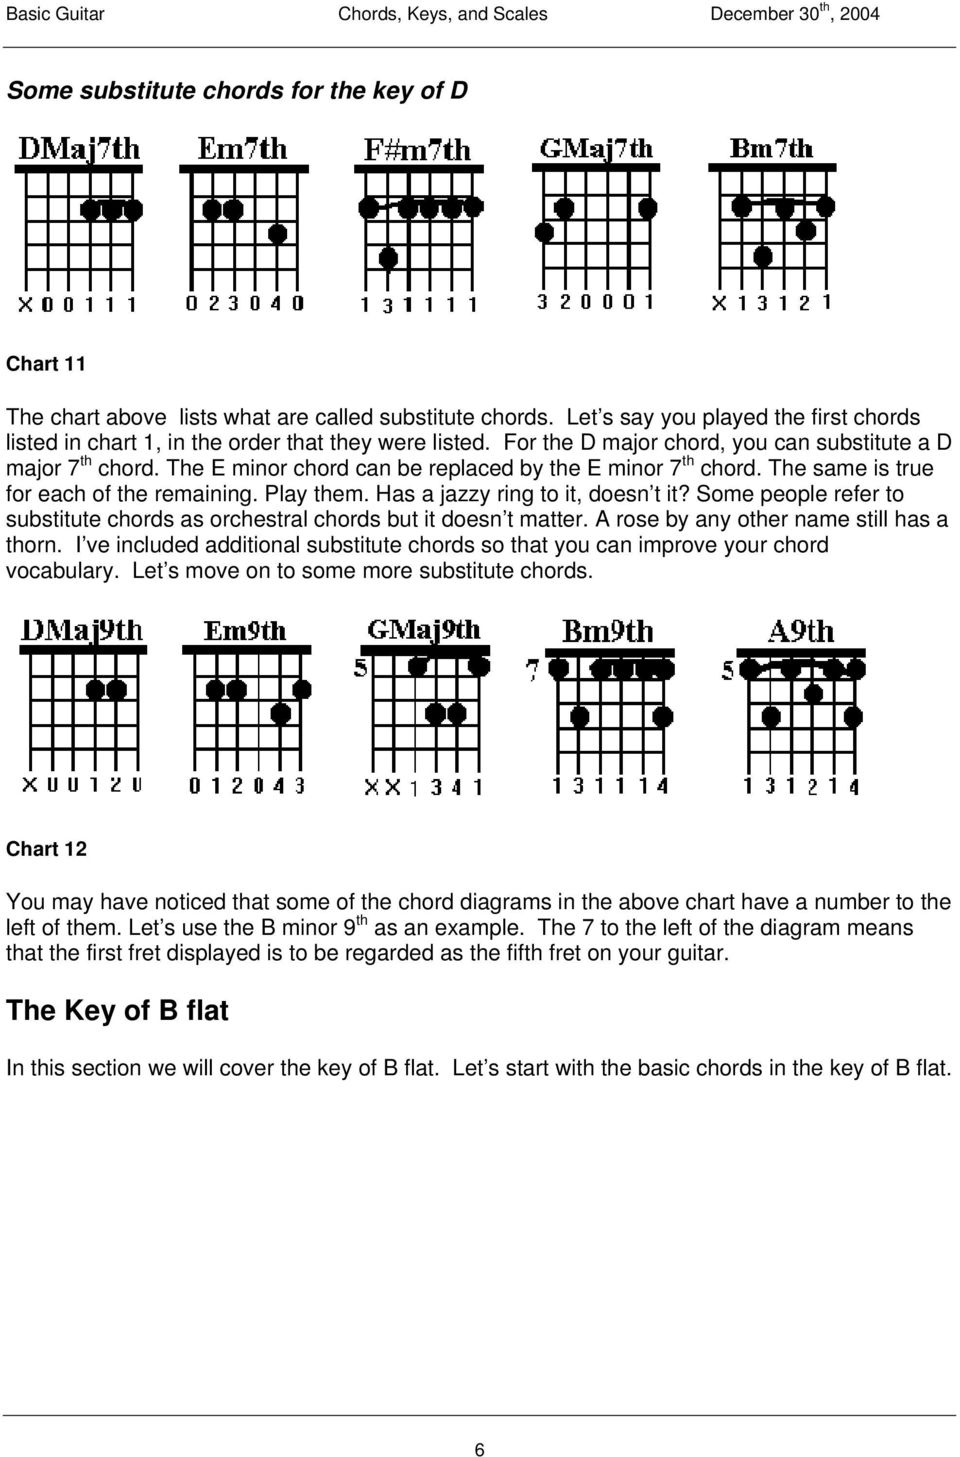 Every Rose Has Its Thorn Chords Guitar Basics Of Chords Keys And Scales Pdf